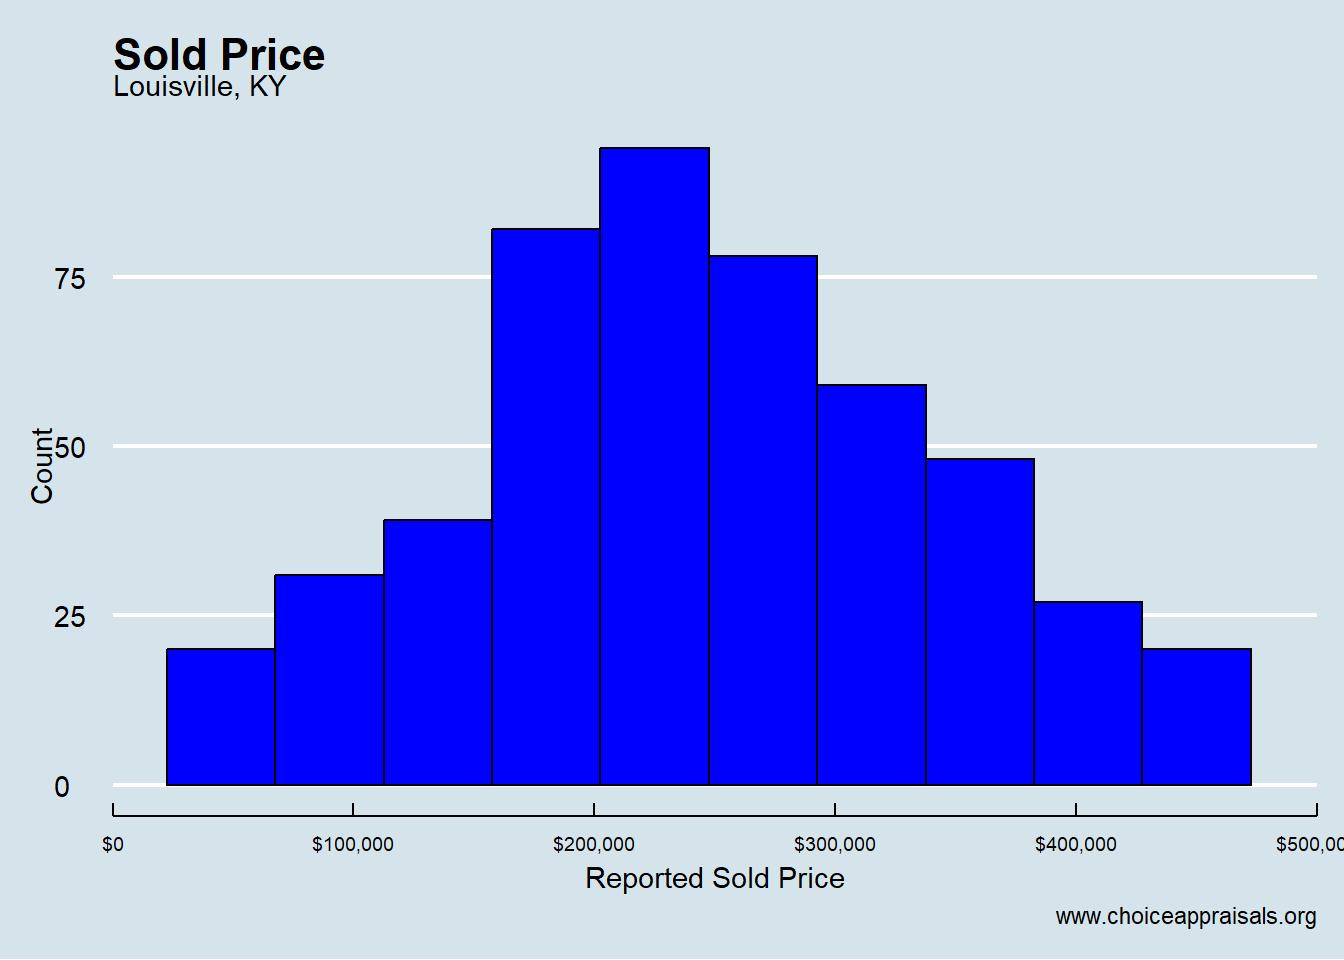 Histogram displaying the distribution of sold prices for homes in Louisville, KY, indicating the most common price range falls between $200,000 and $300,000.